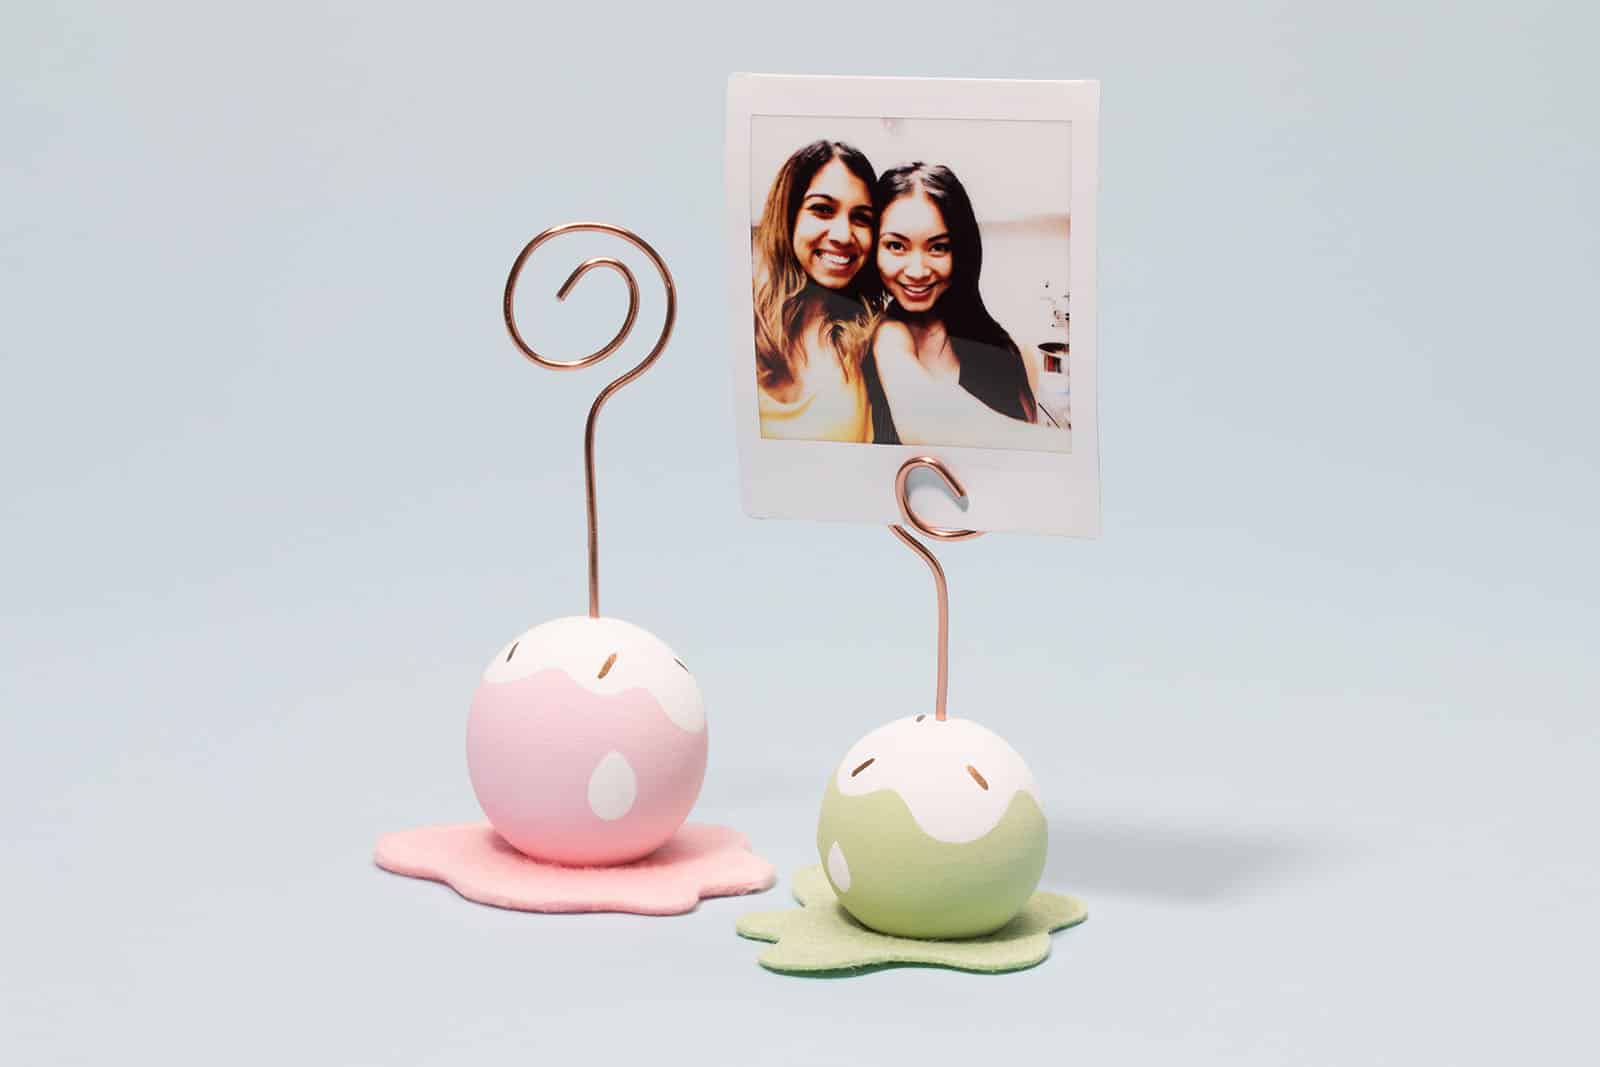 DIY ice cream ball photo holder 15 Best Homemade Stocking Stuffers Ideas and Projects